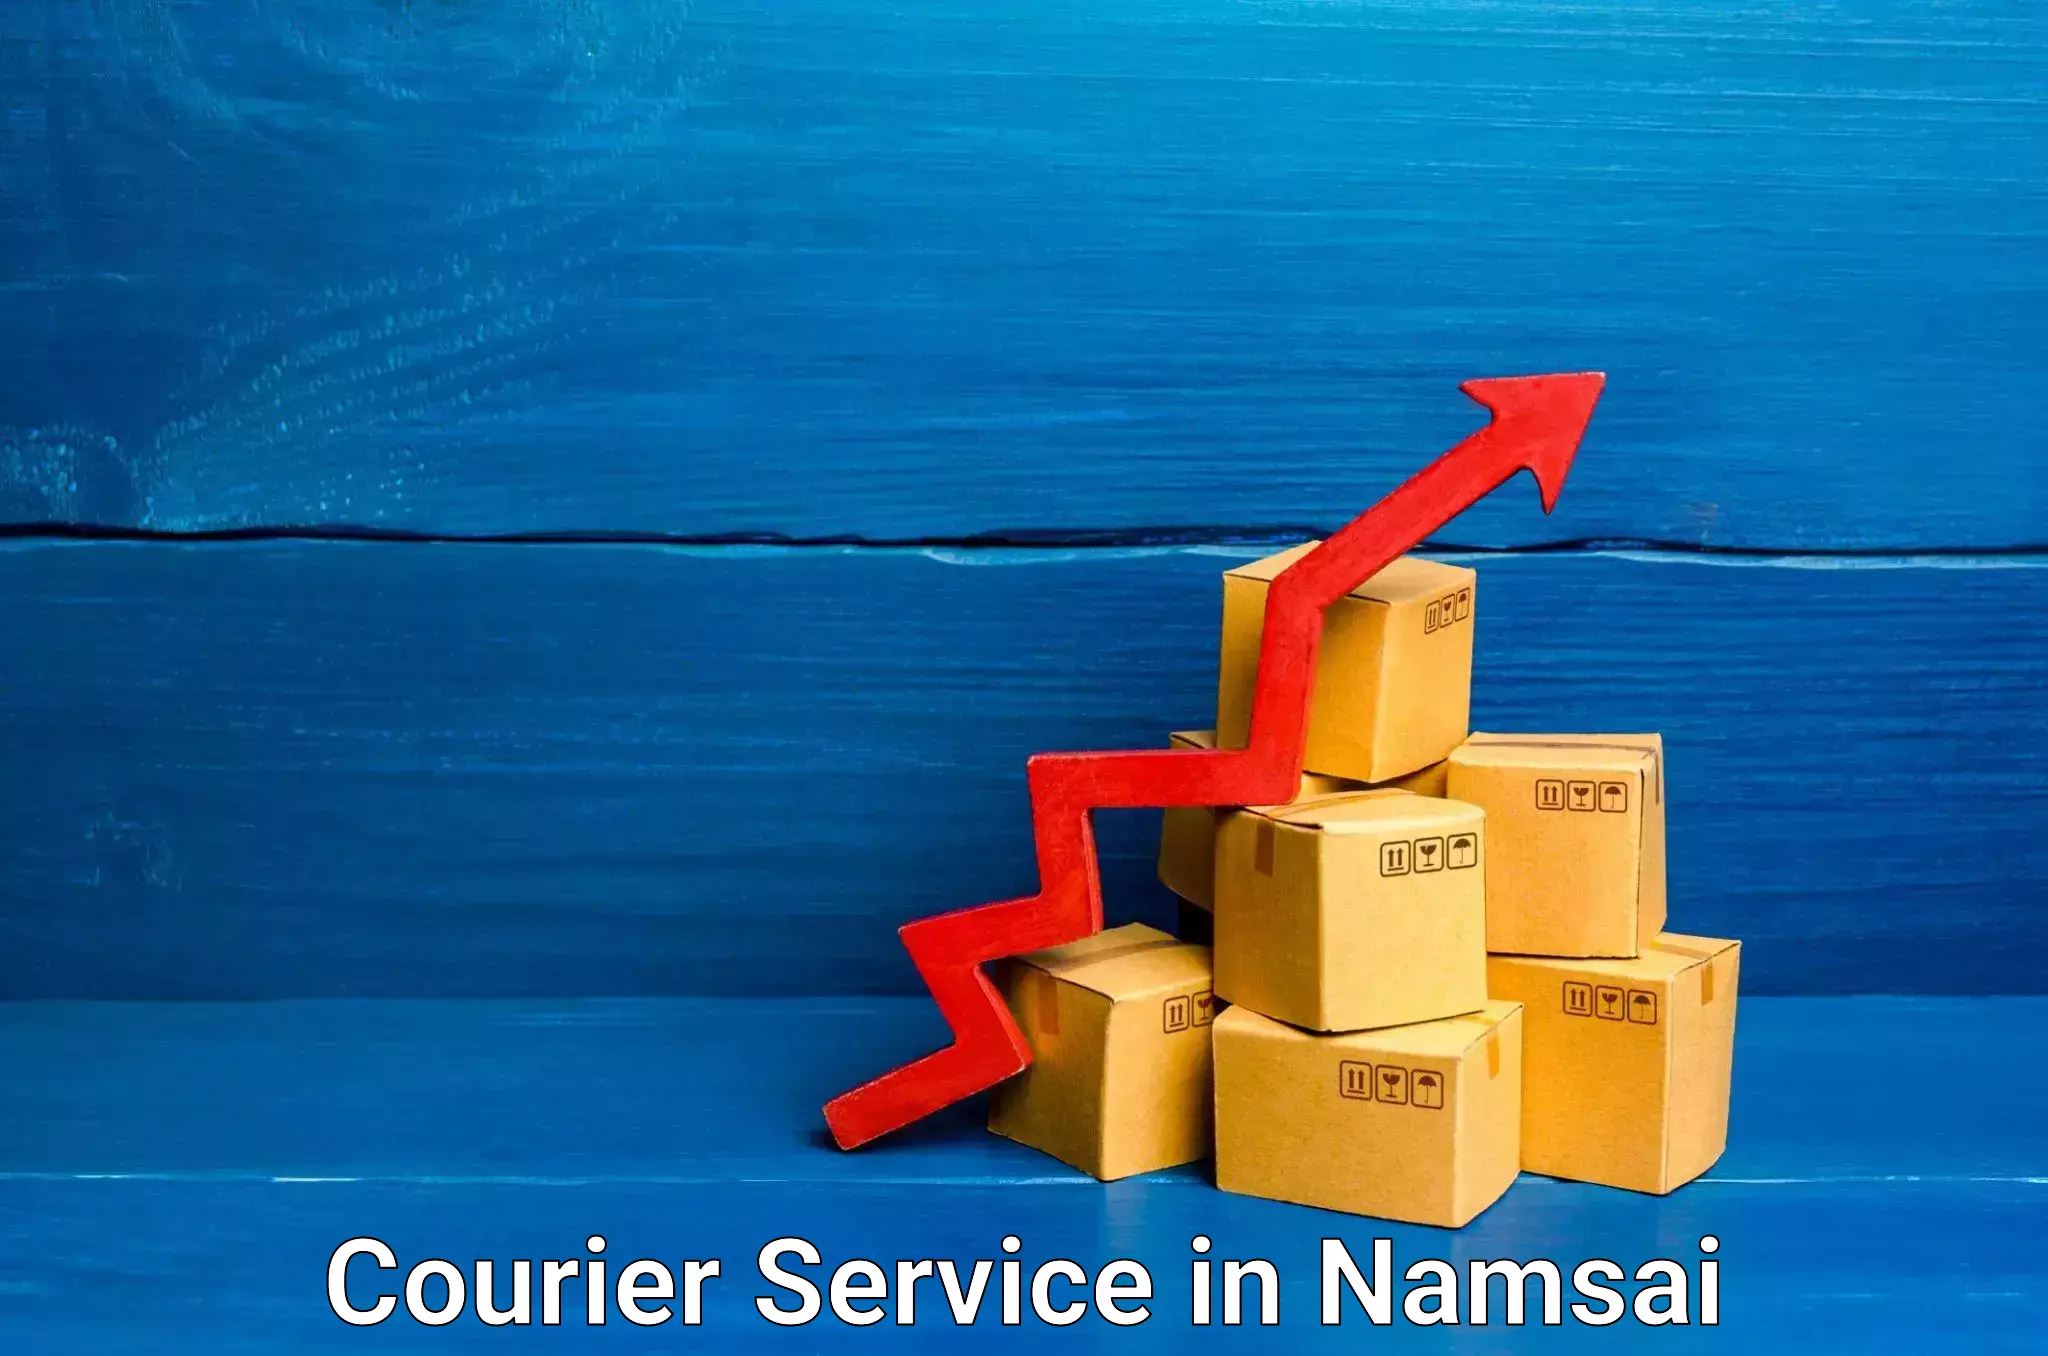 Comprehensive freight services in Namsai